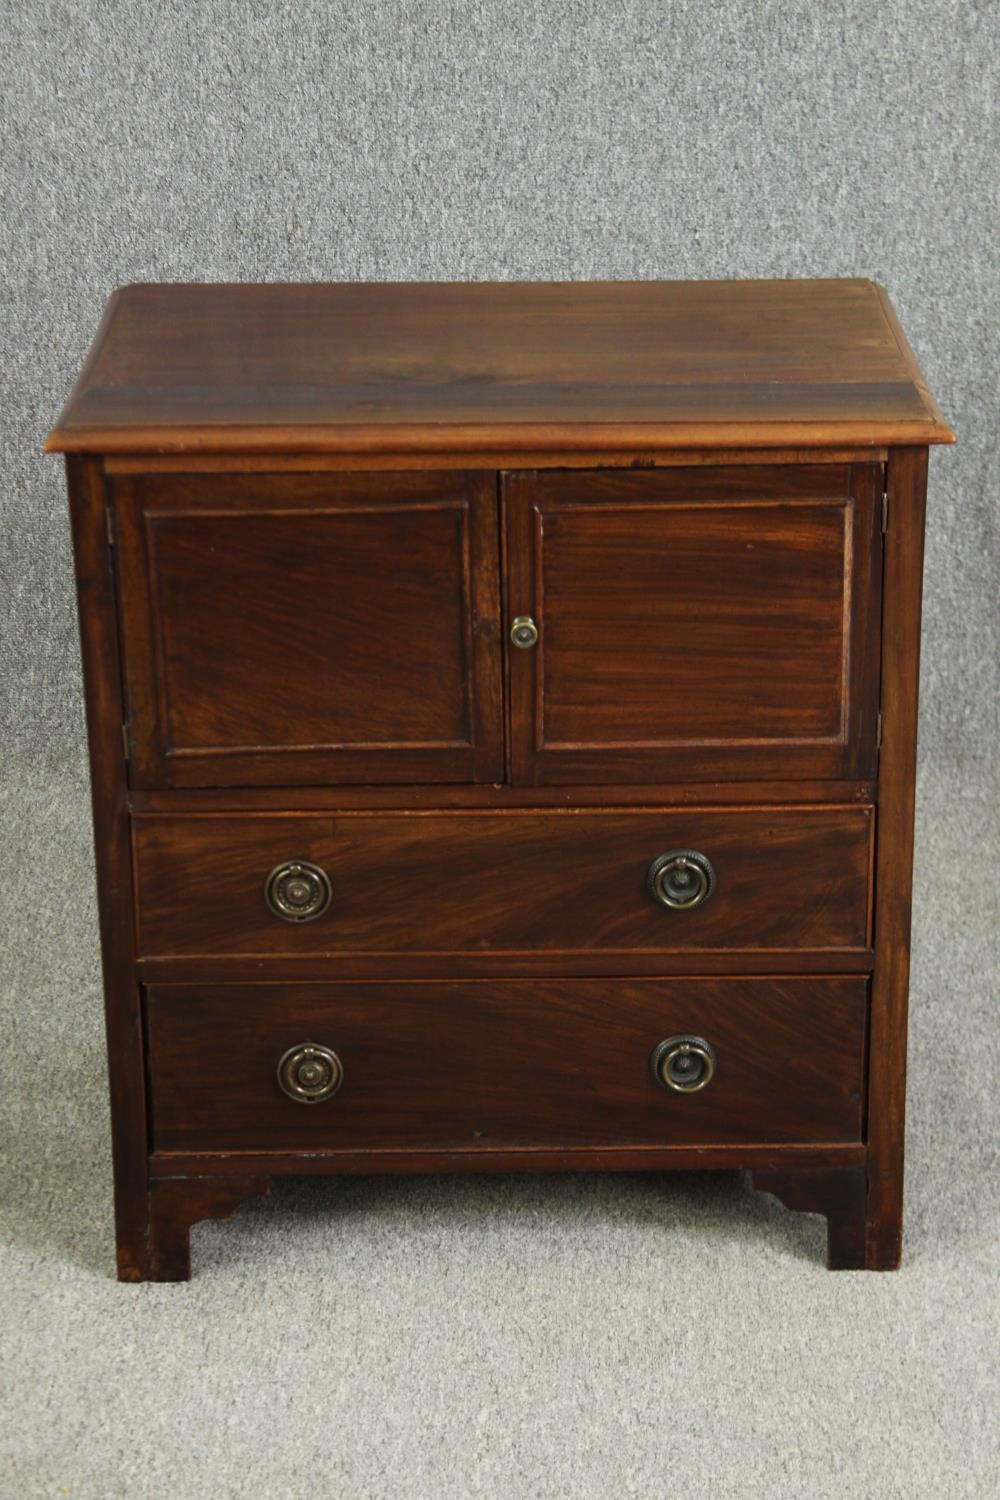 A George III style mahogany bedside cabinet, 19th century. H.72 W.66 D.44cm.